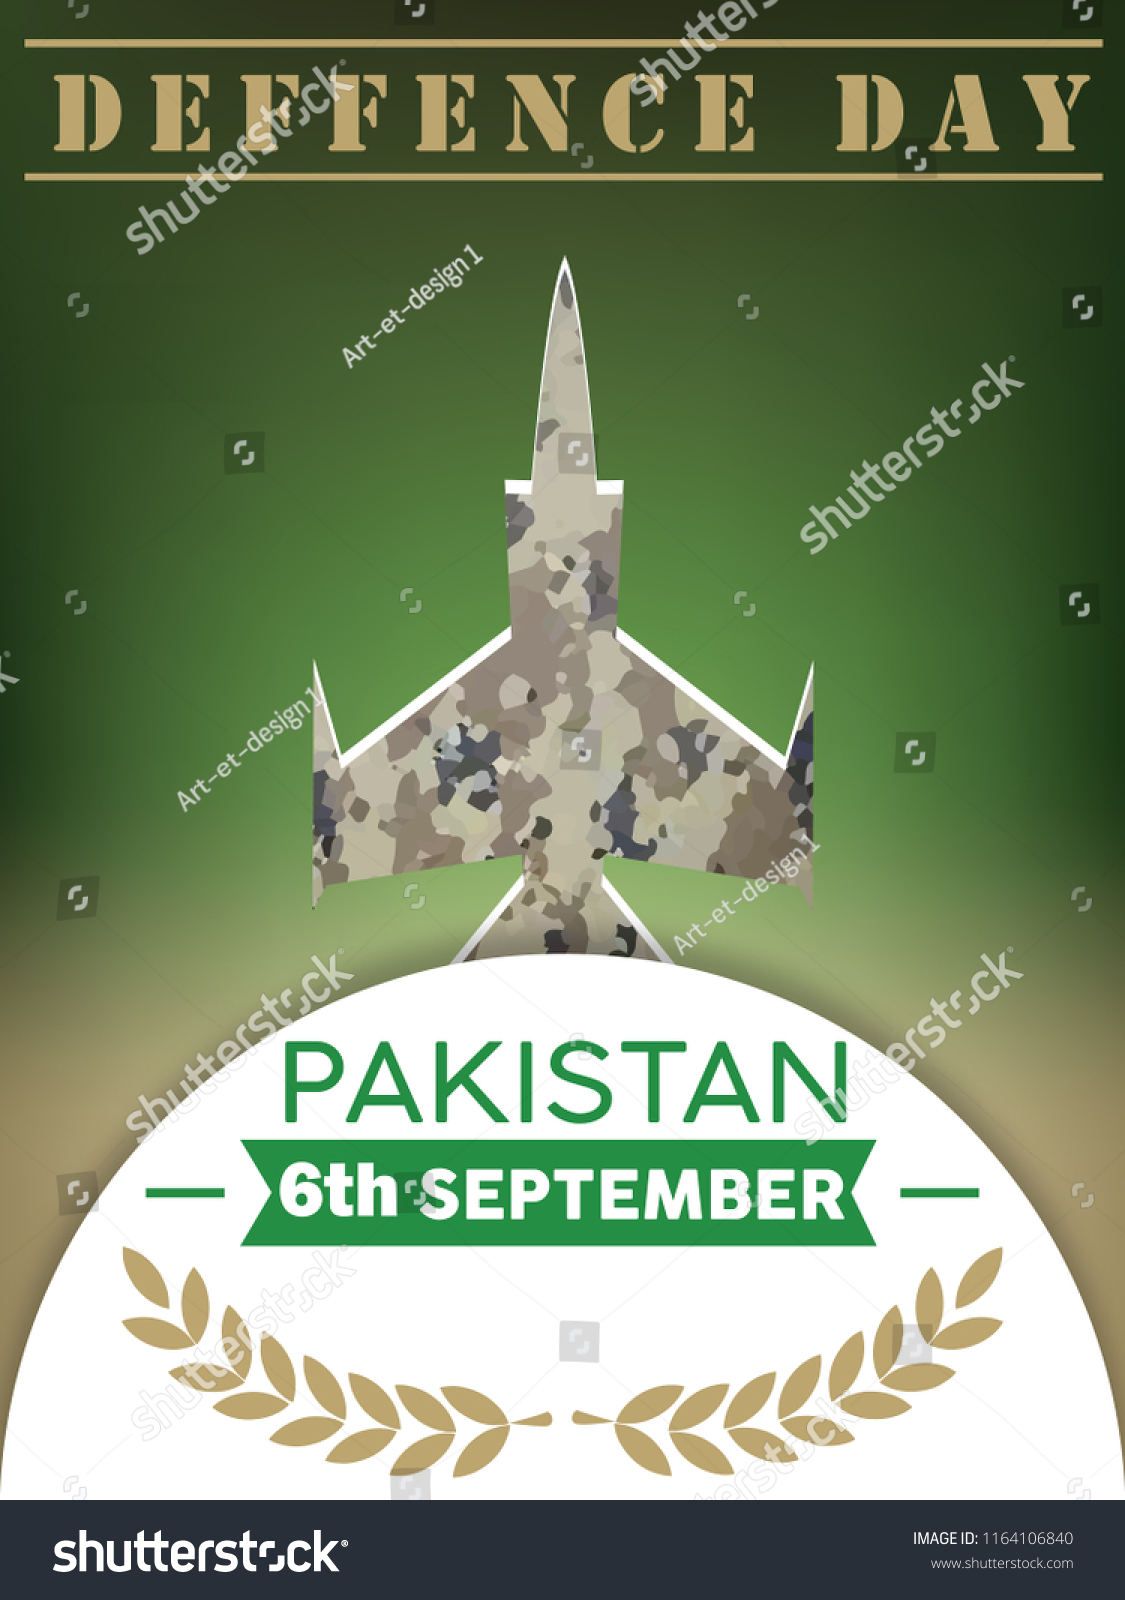 Pakistan Defence Day Th September Vector Stock Vector Royalty Free Shutterstock